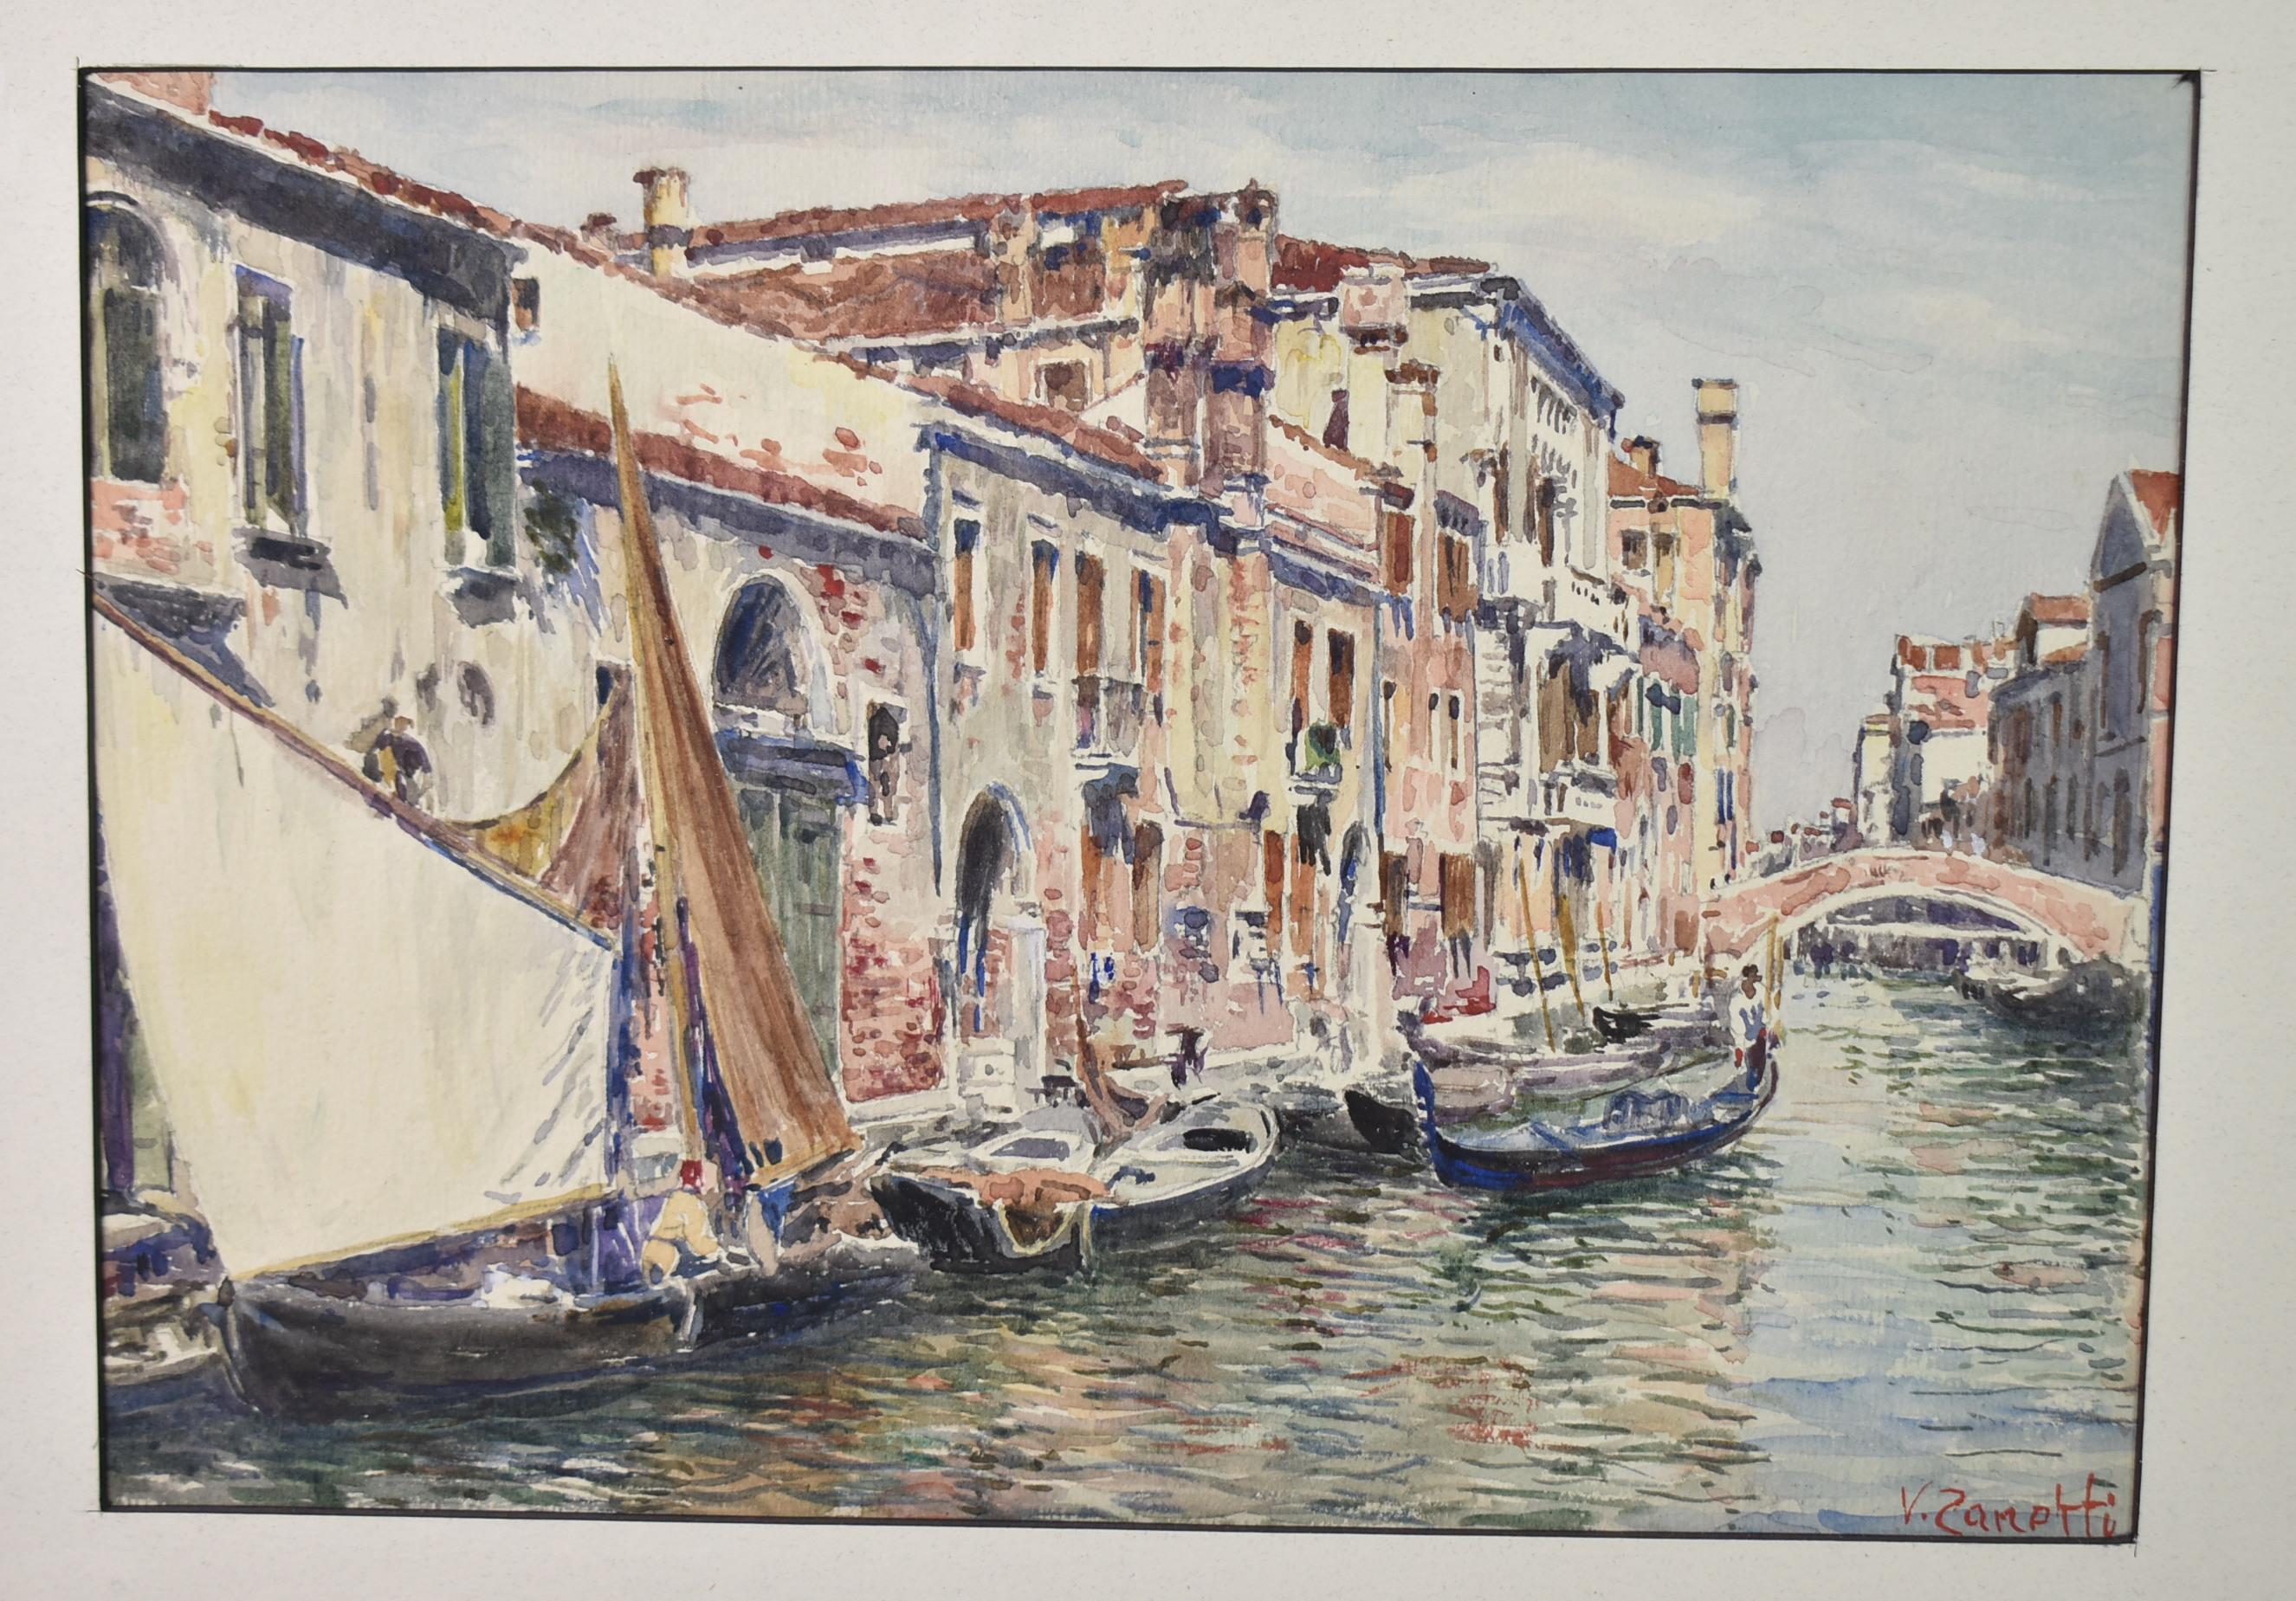 Italian watercolor canal scene by Vettore Zanetti (1964-1946), signed lower left corner, circa 1890-1910s. Zanetti participated in international exhibitions, specifically in the Venice Art since its inception in 1895. He experimented with watercolor